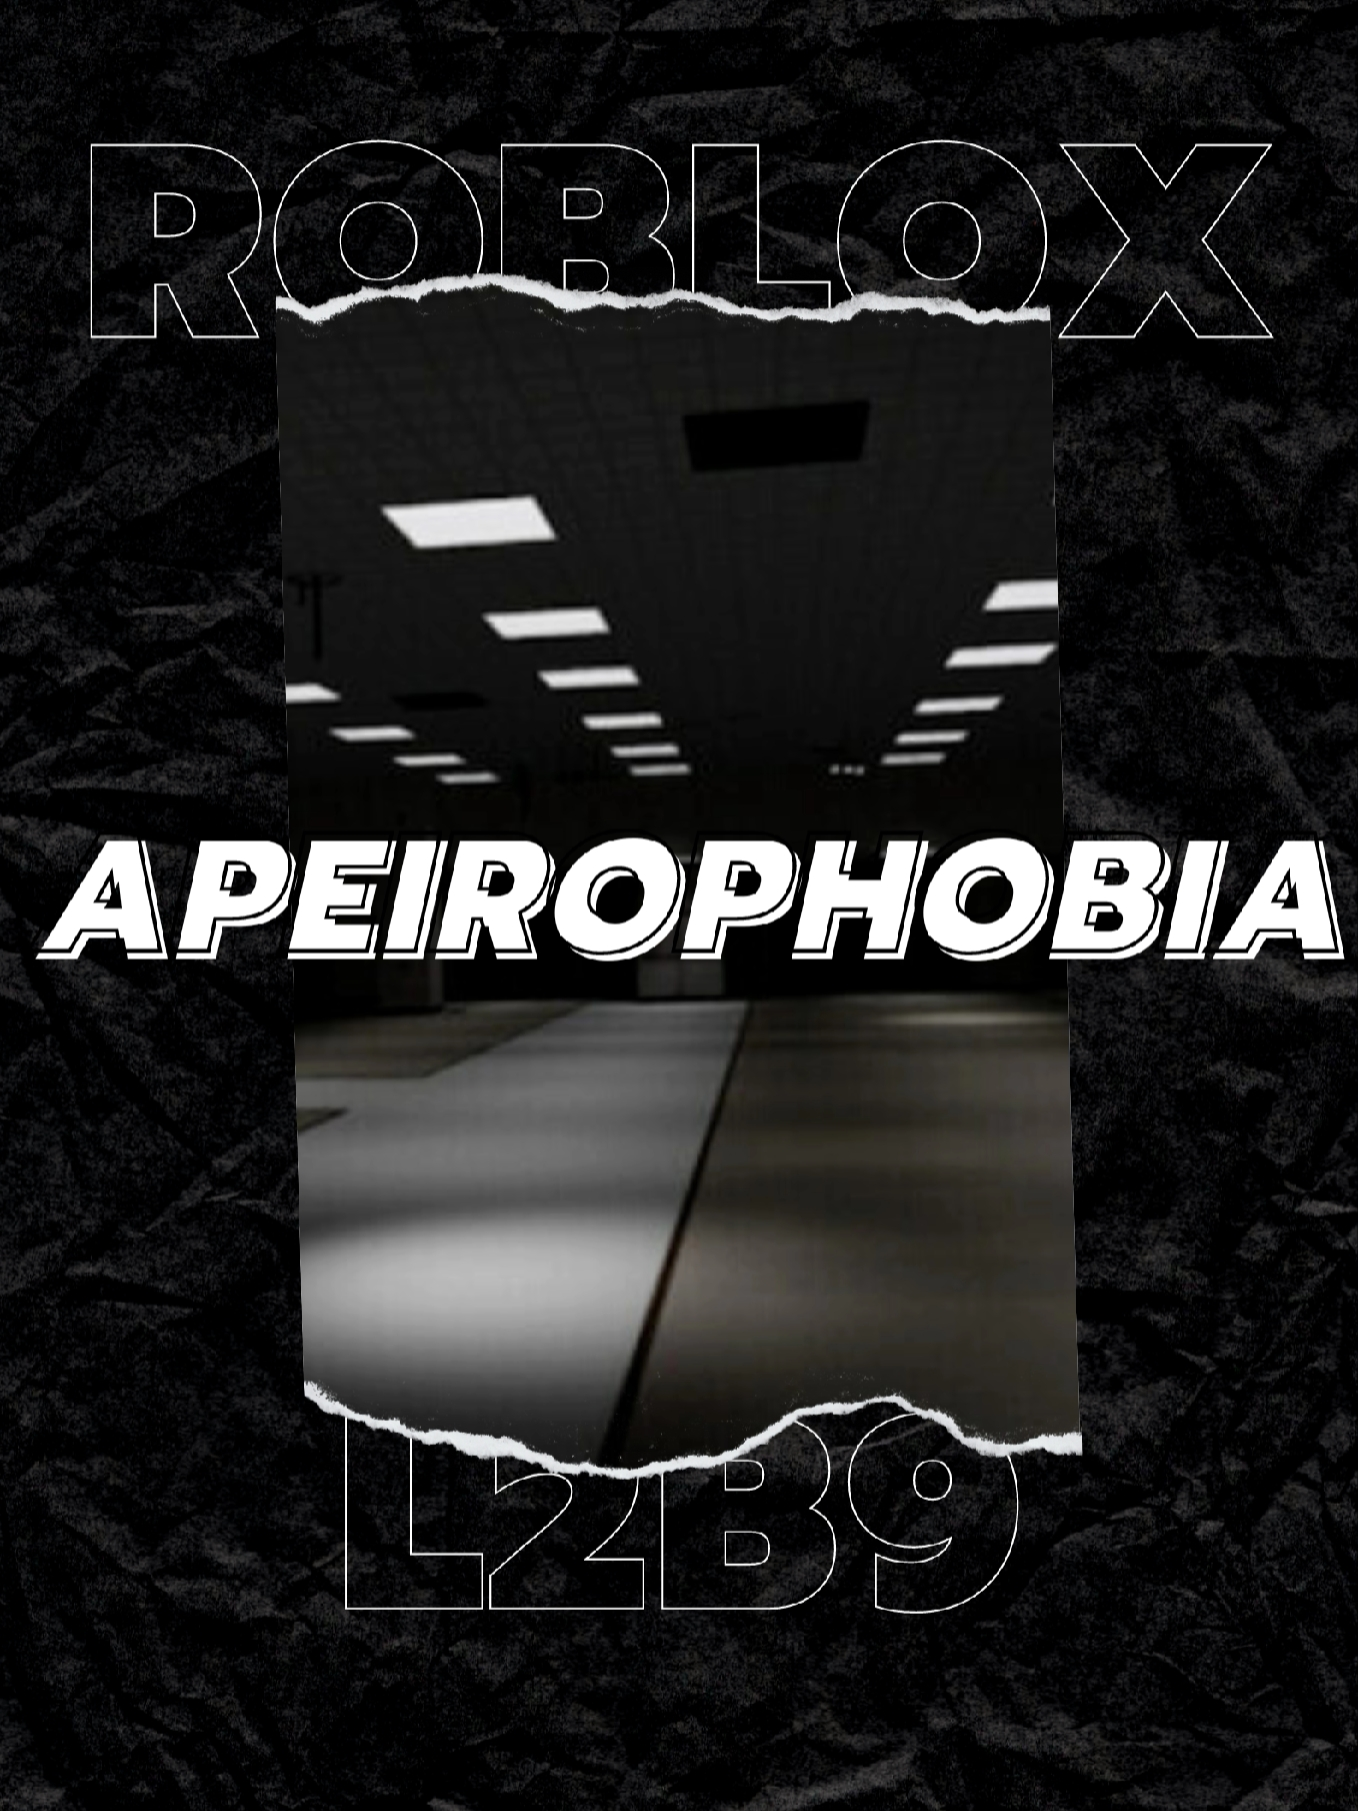 Roblox Apeirophobia Chapter 1 vs Chapter 2 JumpScares [Roblox